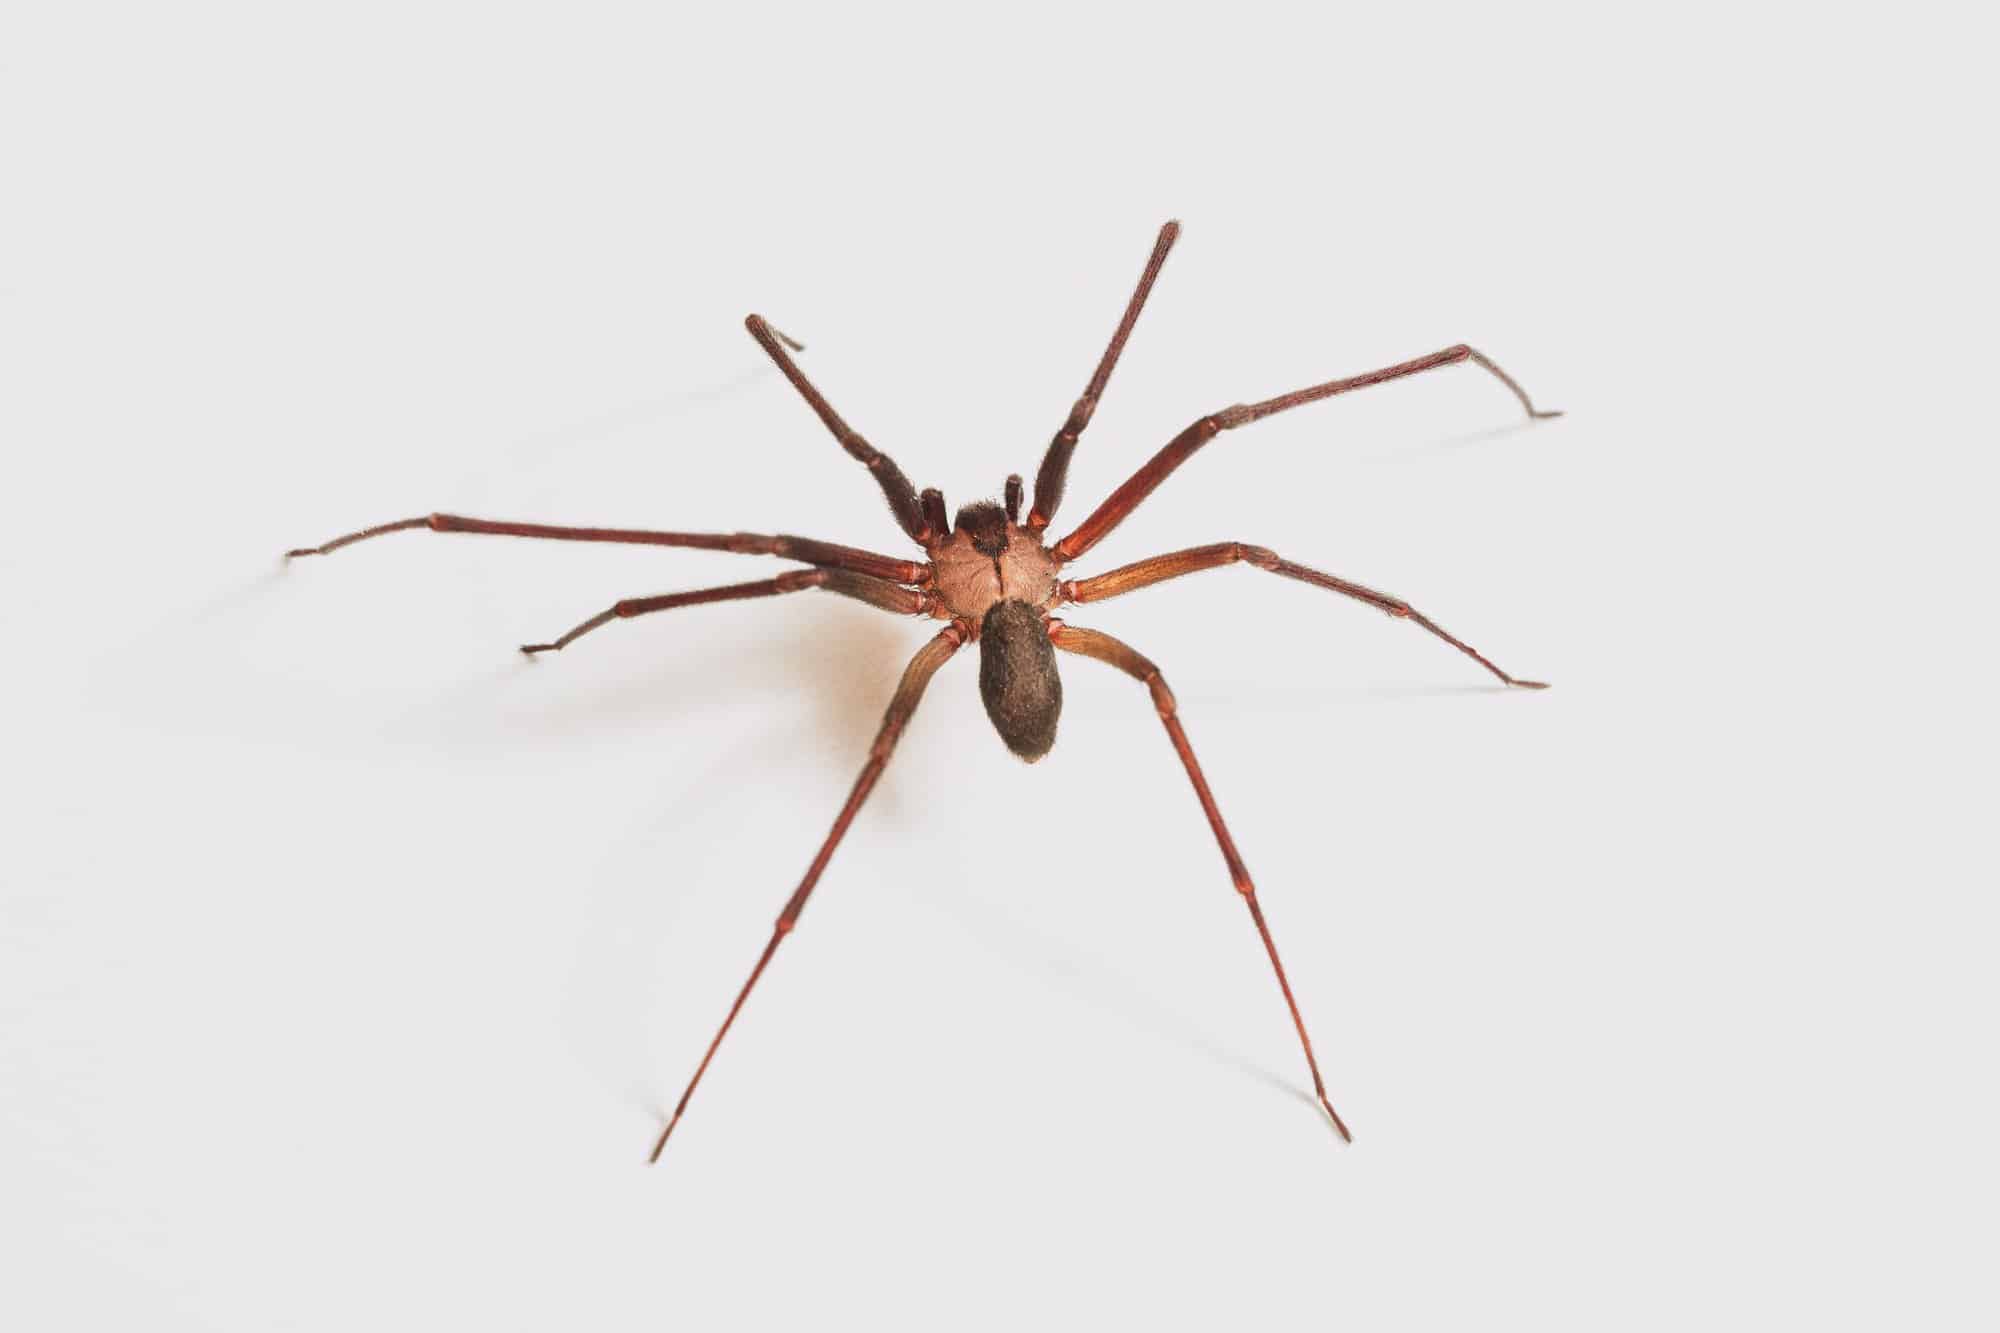 domestic house spider